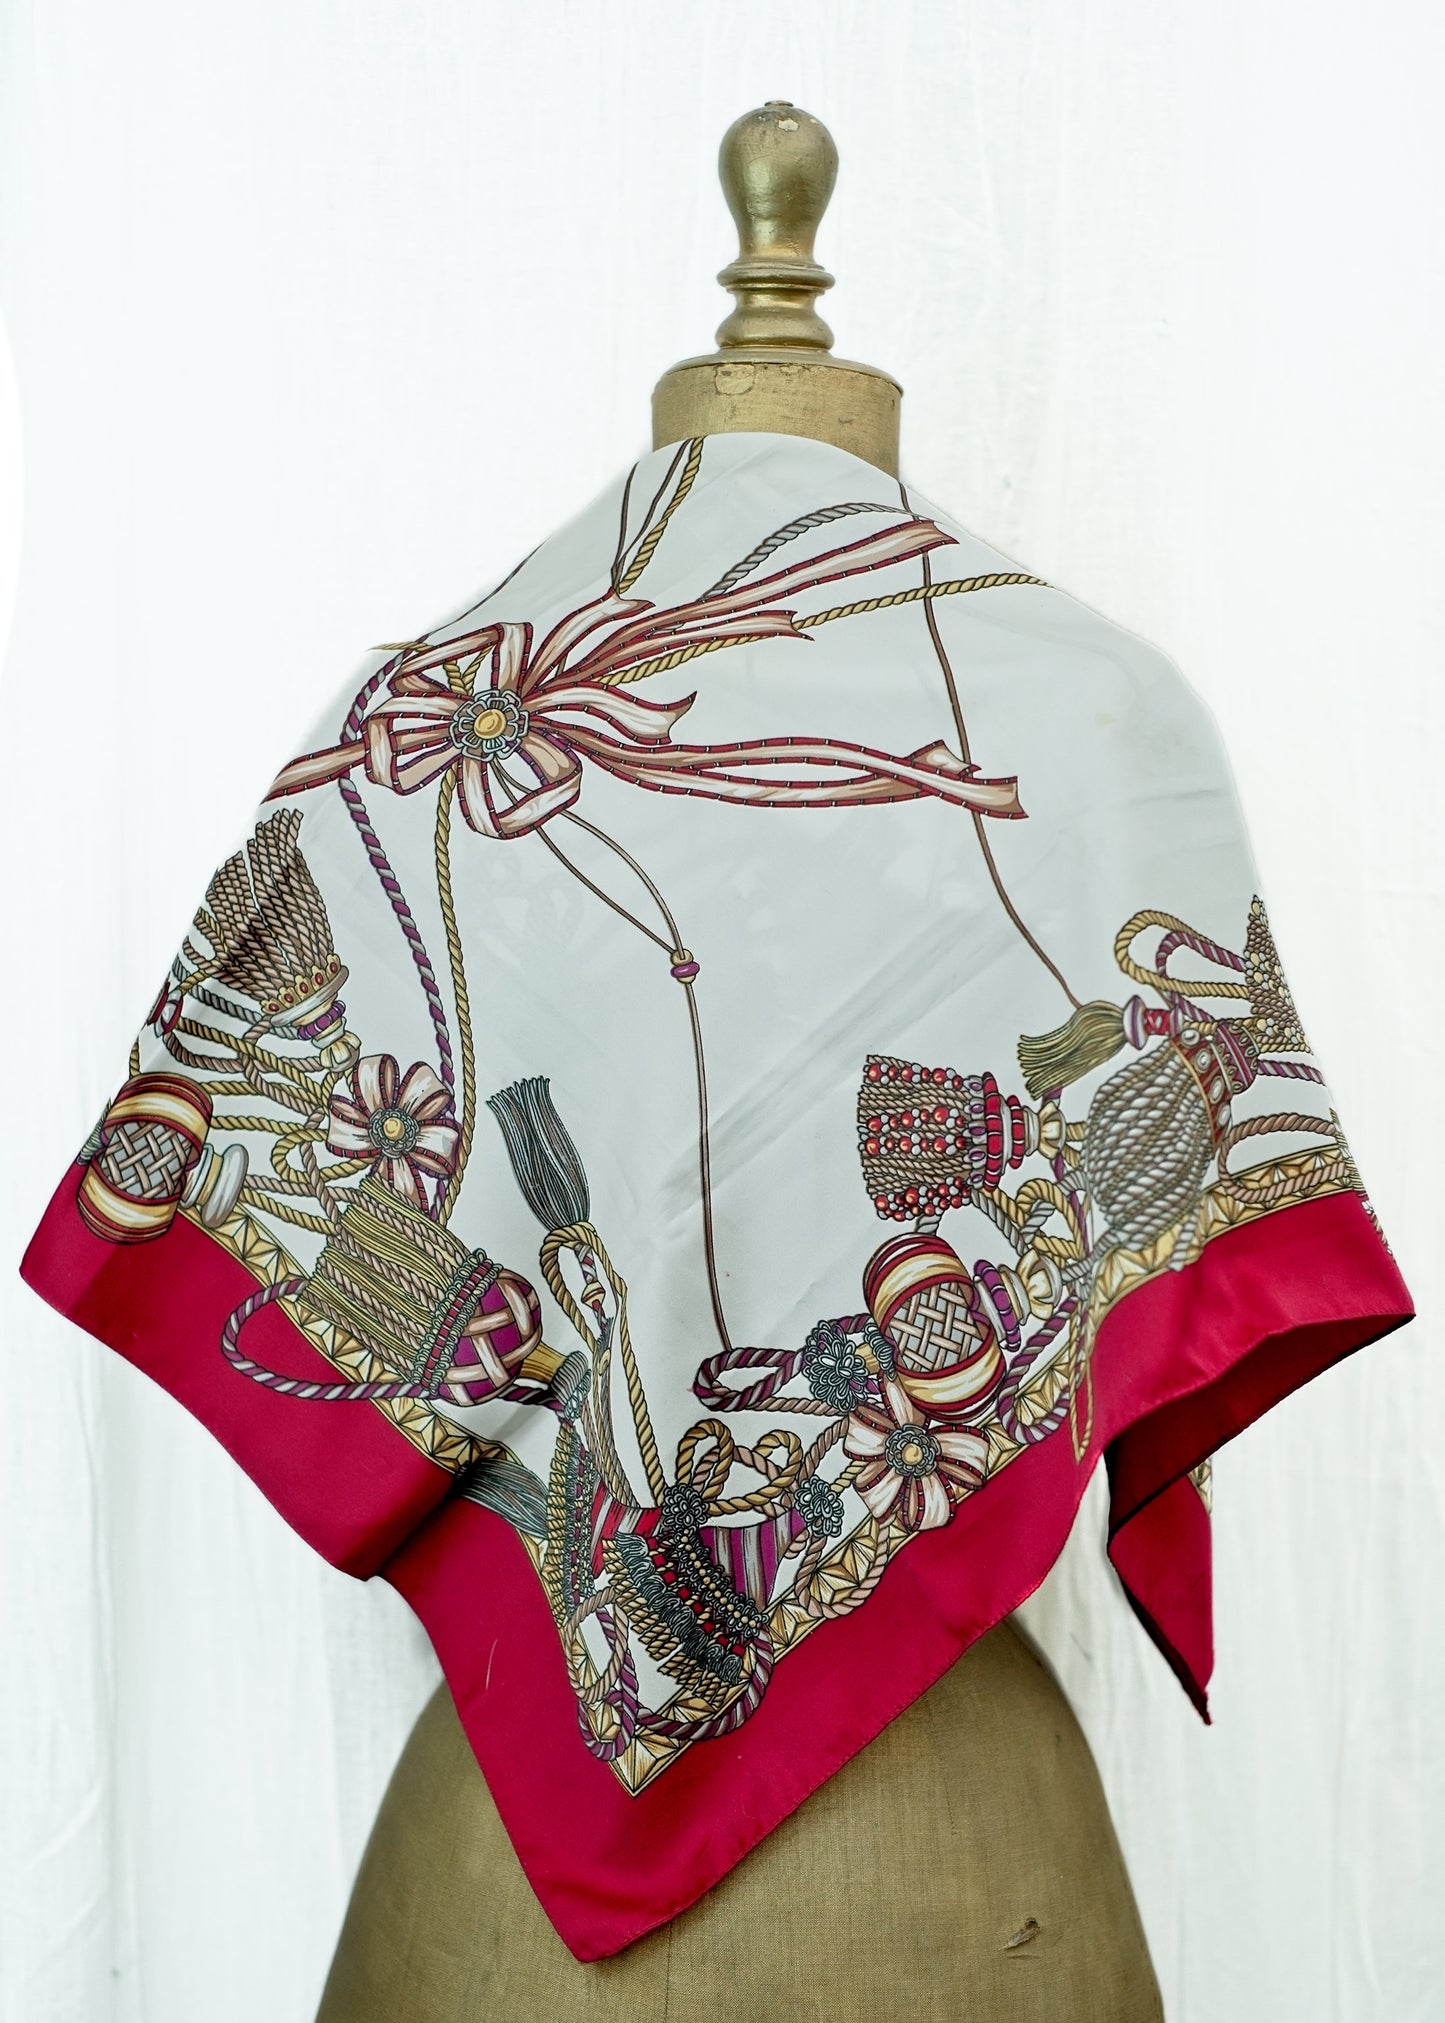 Red and White Baroque Swags Scarf Shawl